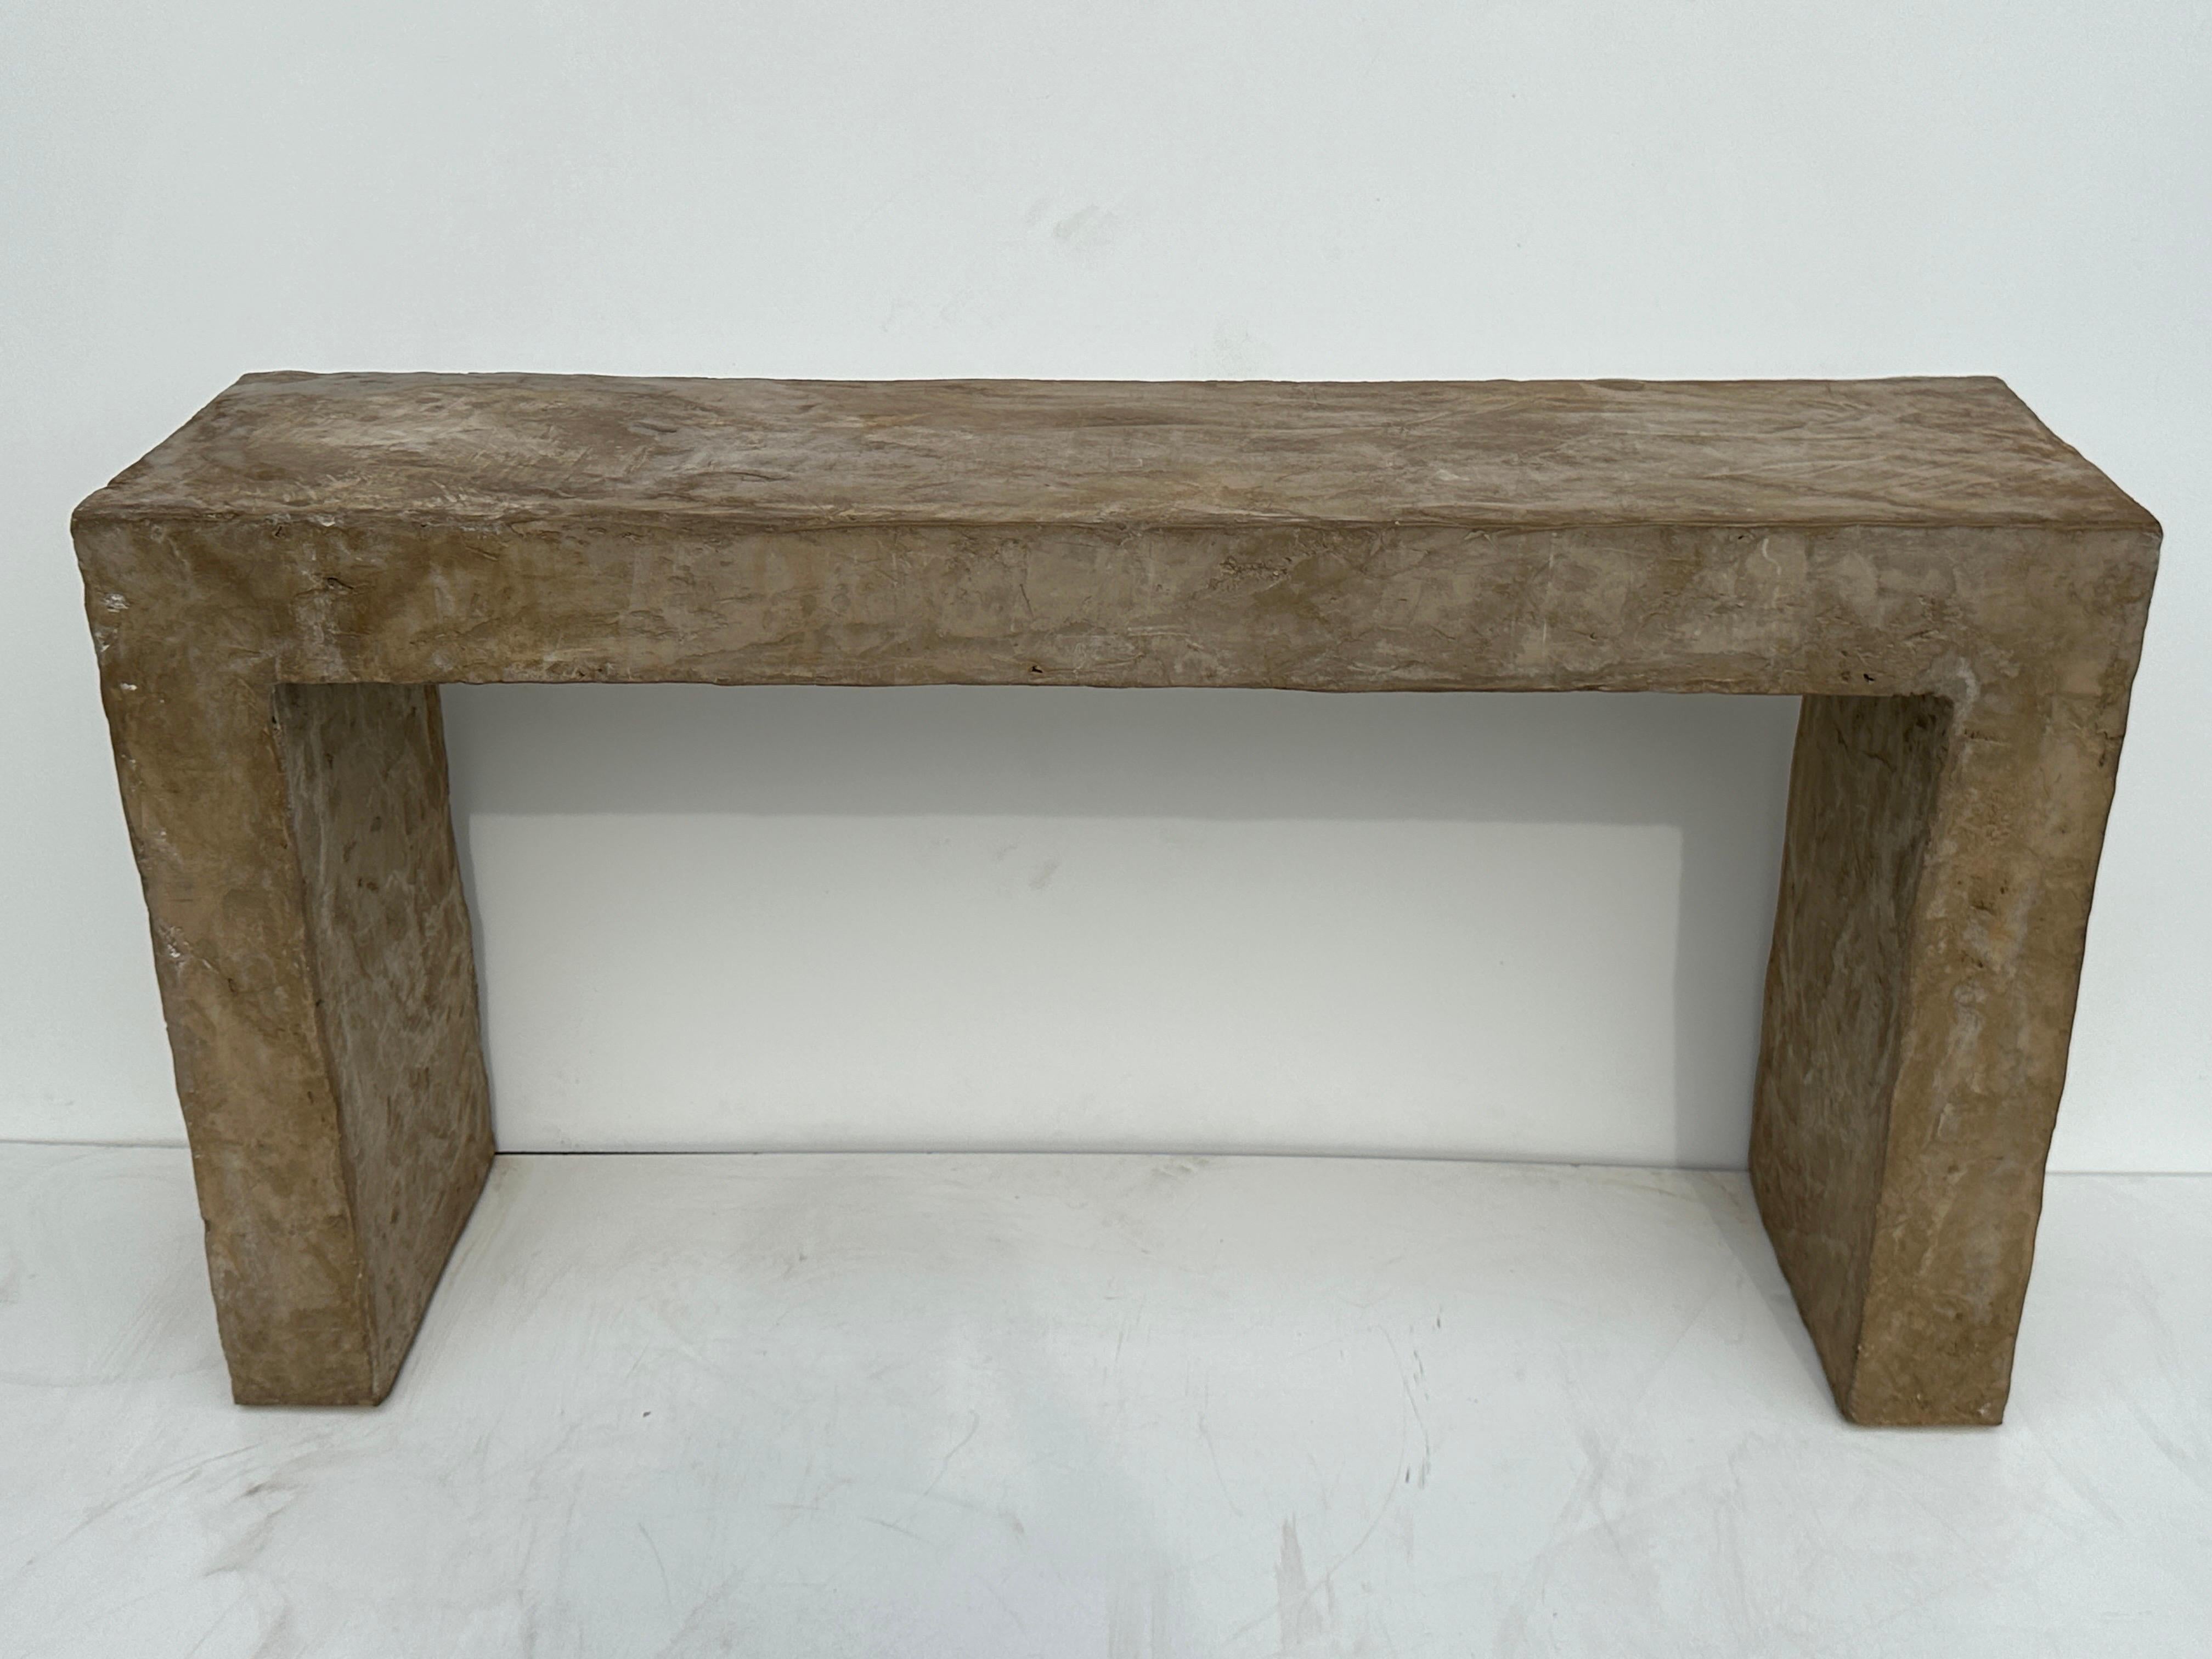 Primitive organic parsons style polished concrete console table in the style of John Dickinson